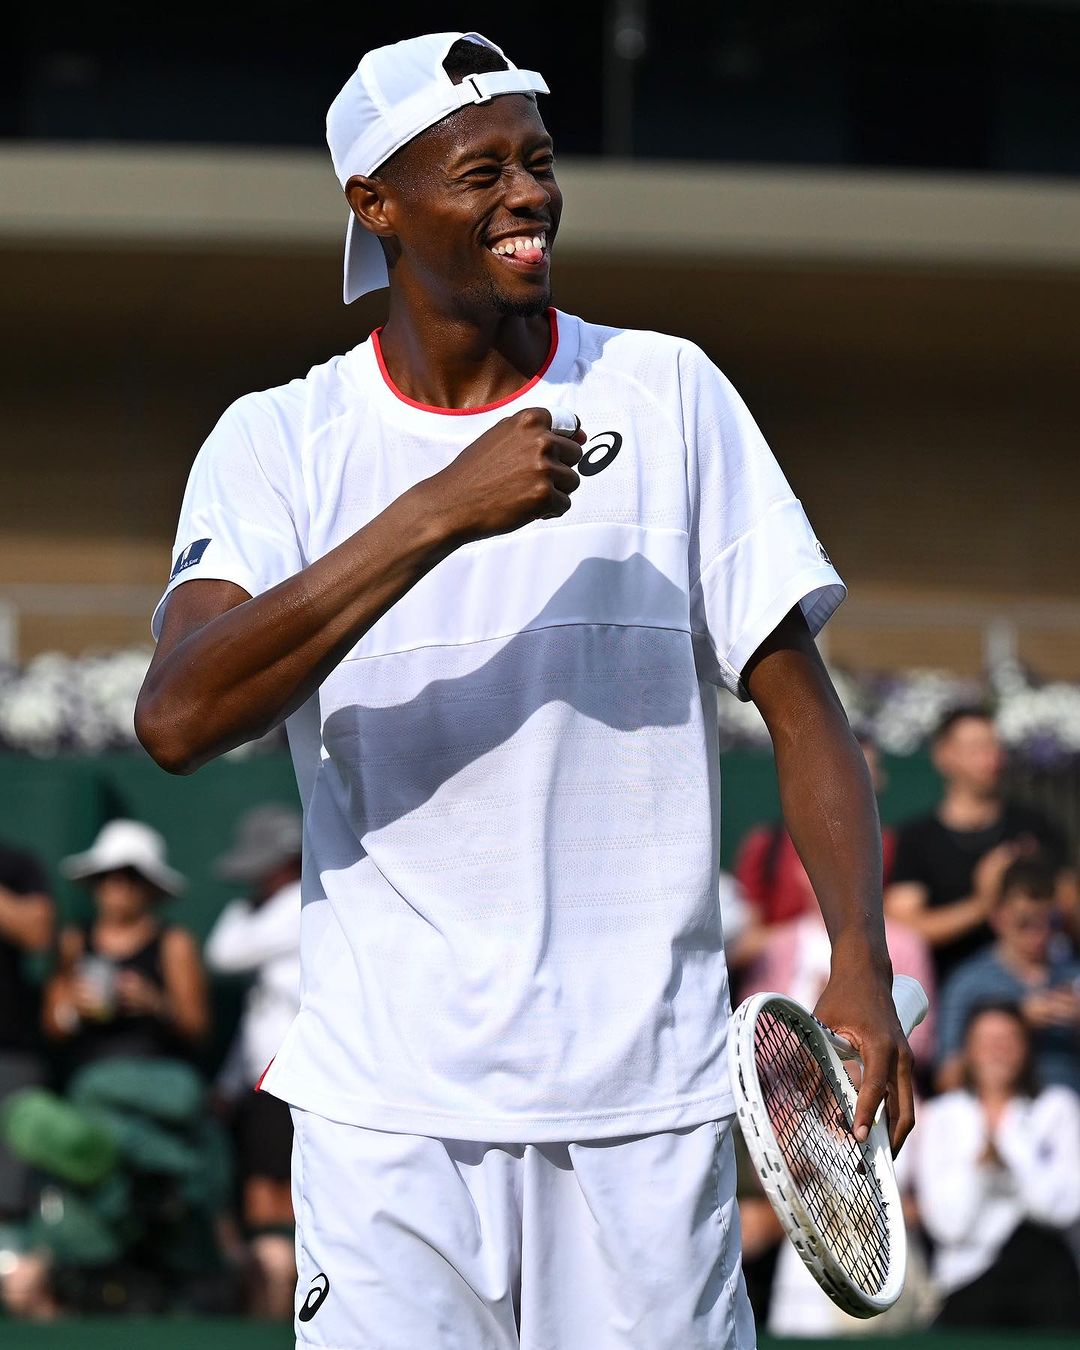 Eubanks Defeated The #5 Seed Stefanos Tsitsipas In The Fourth Round Of The 2023 Wimbledon To Advance Into The Quarterfinalsed The #3 Seed Stefanos Tsitsipas In The Fourth Round Of The 2023 Wimbledon To Advance Into The Quarterfinals